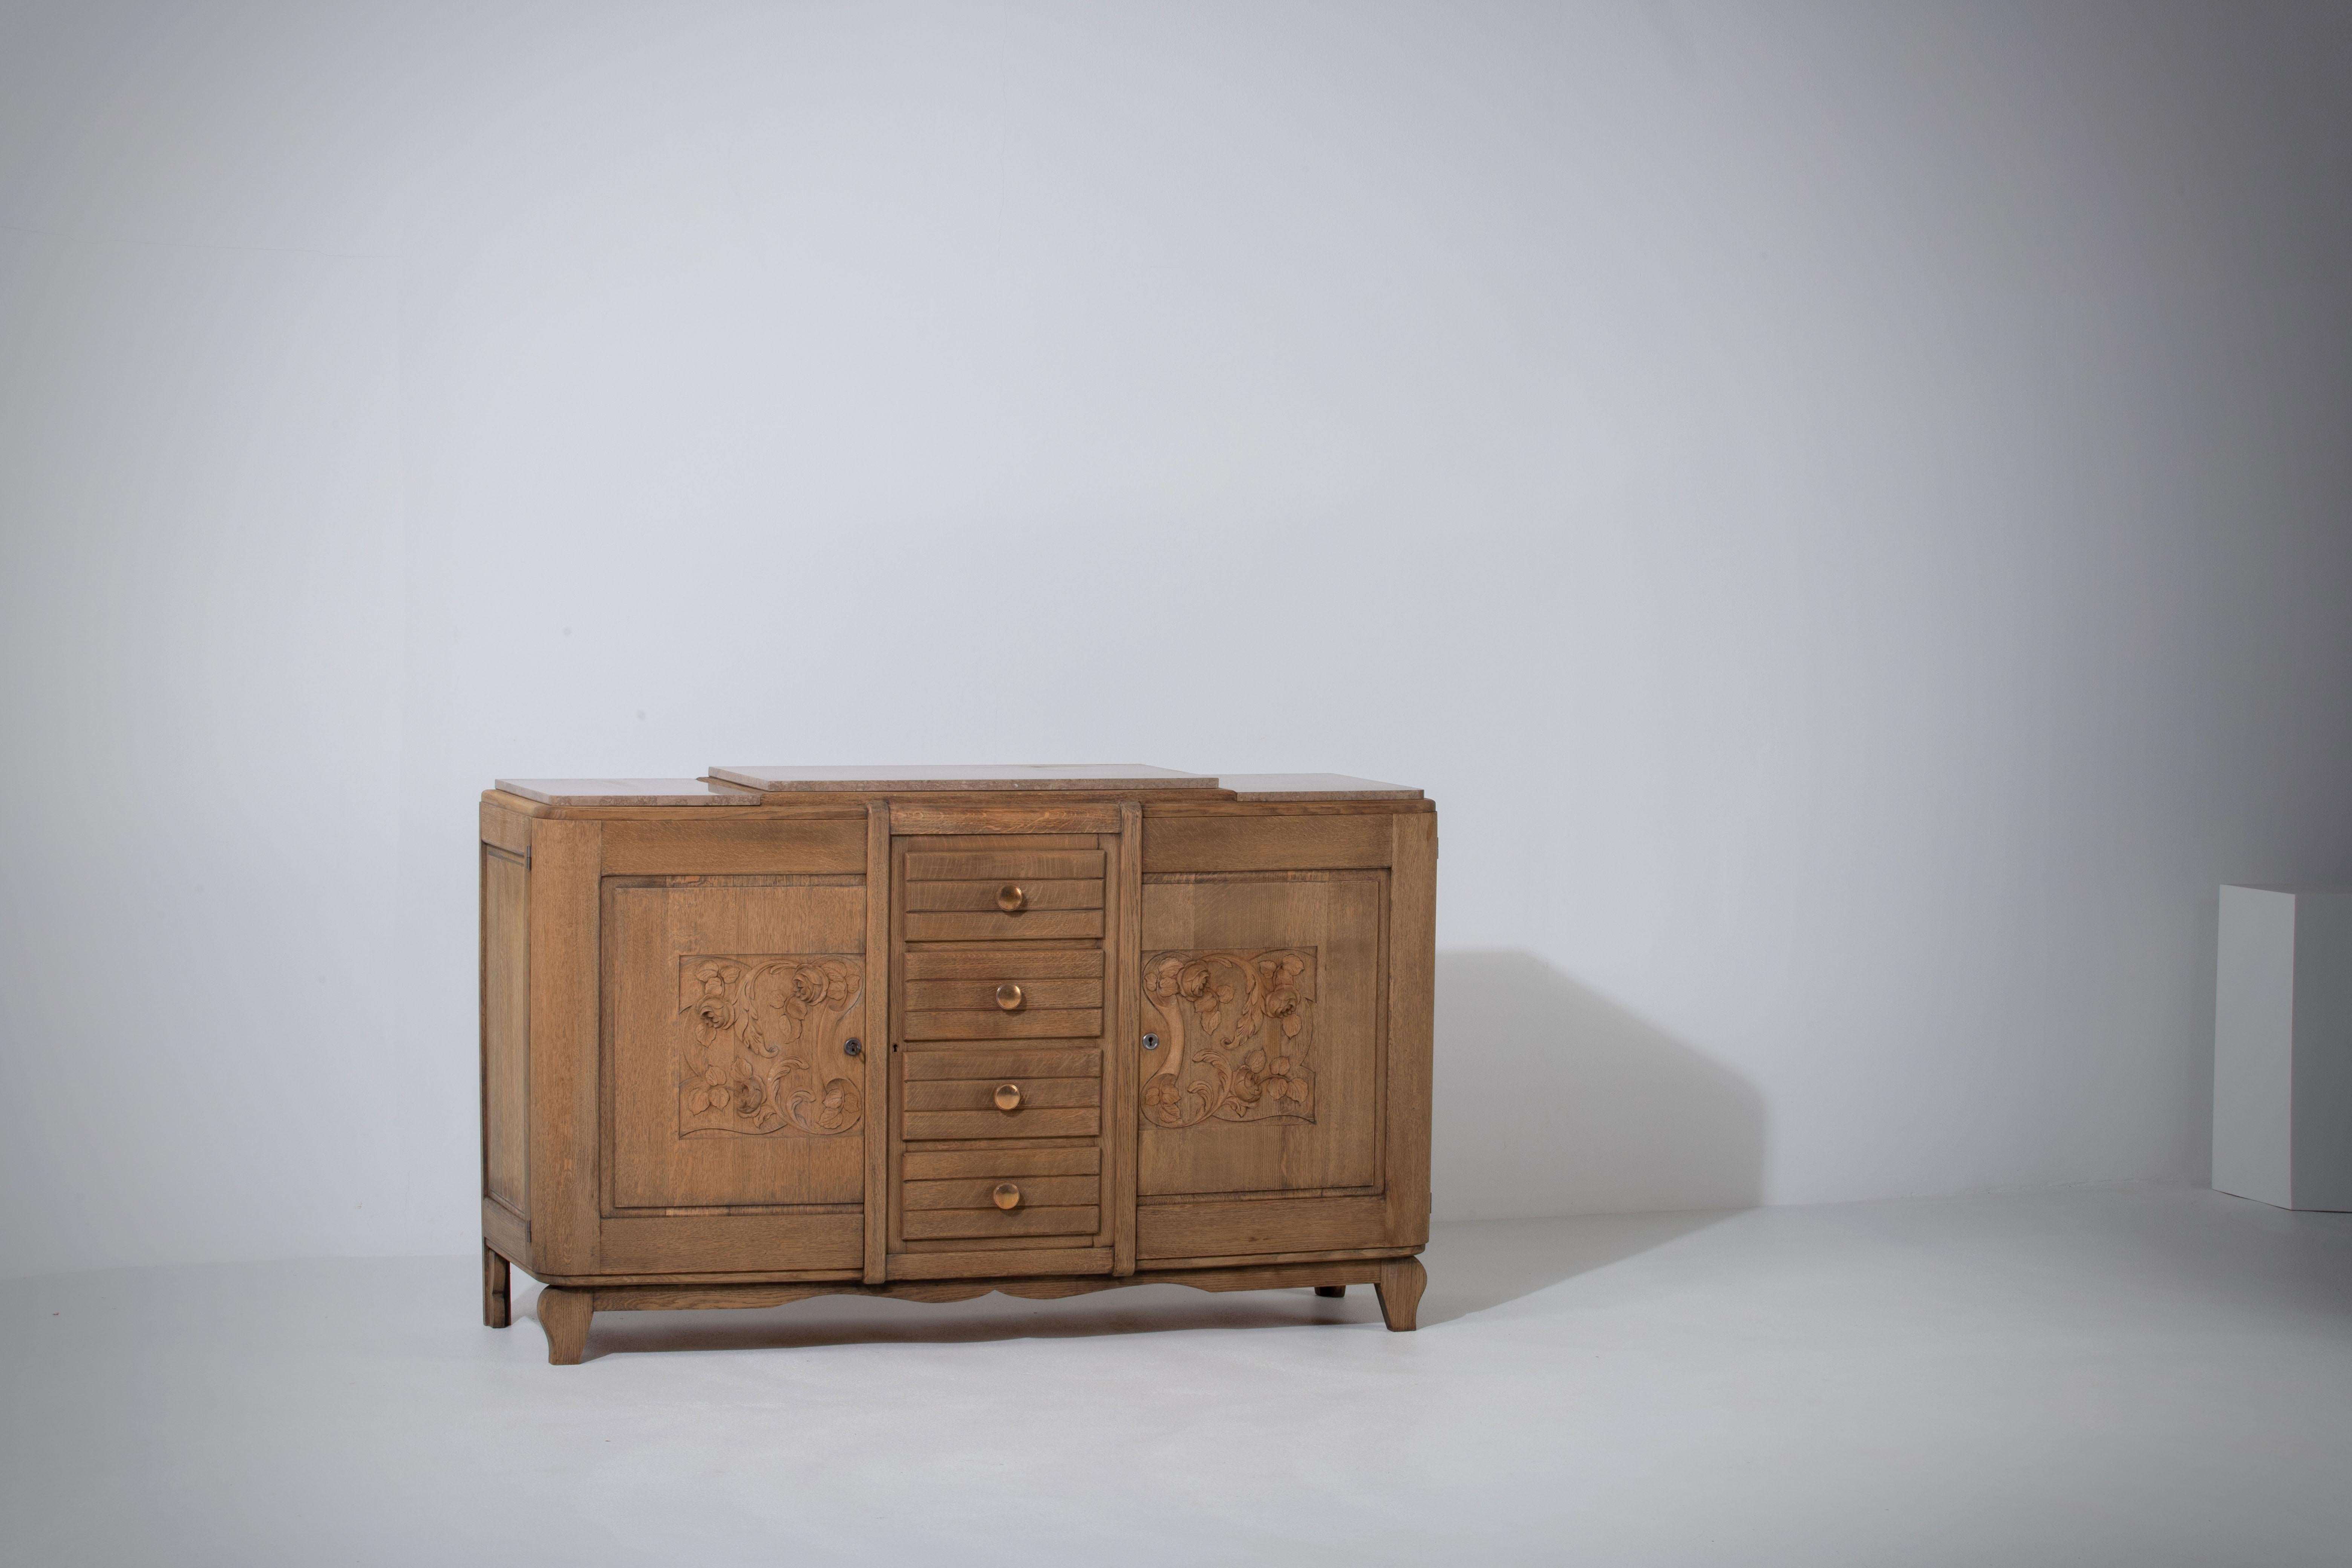 Art Deco French Solid Oak Credenza with Carved Details, 1940s For Sale